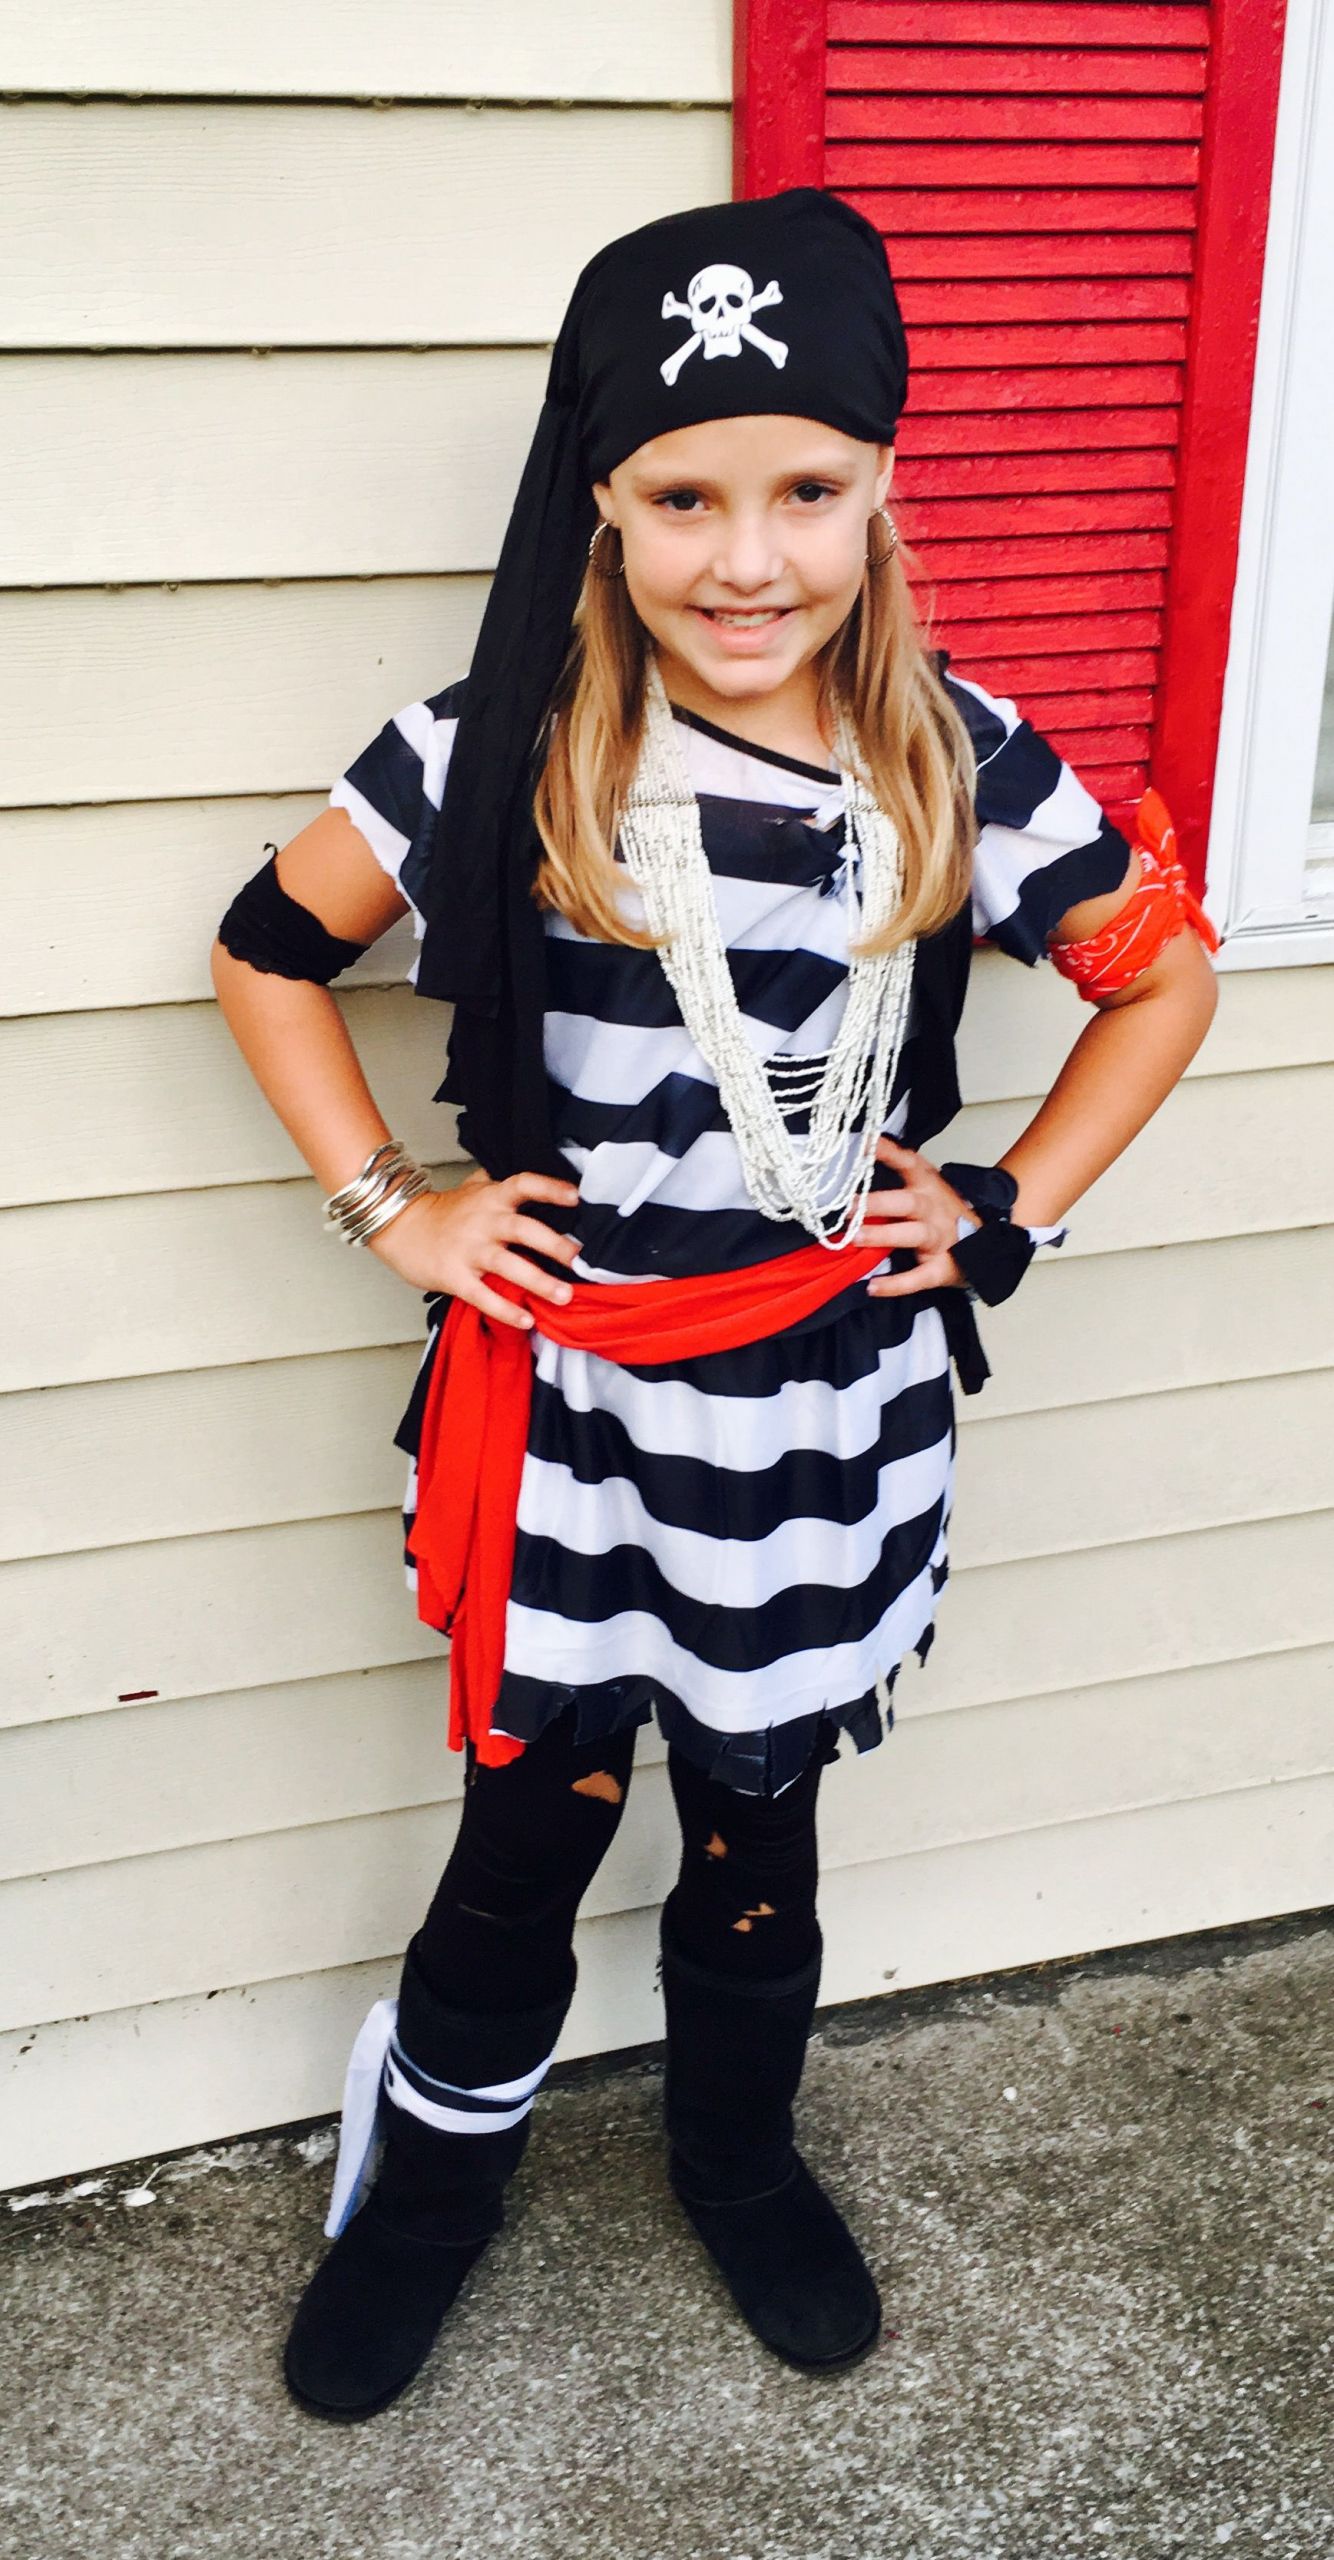 Diy Child Pirate Costume
 Easy girl s pirate costume made from cheap adult size